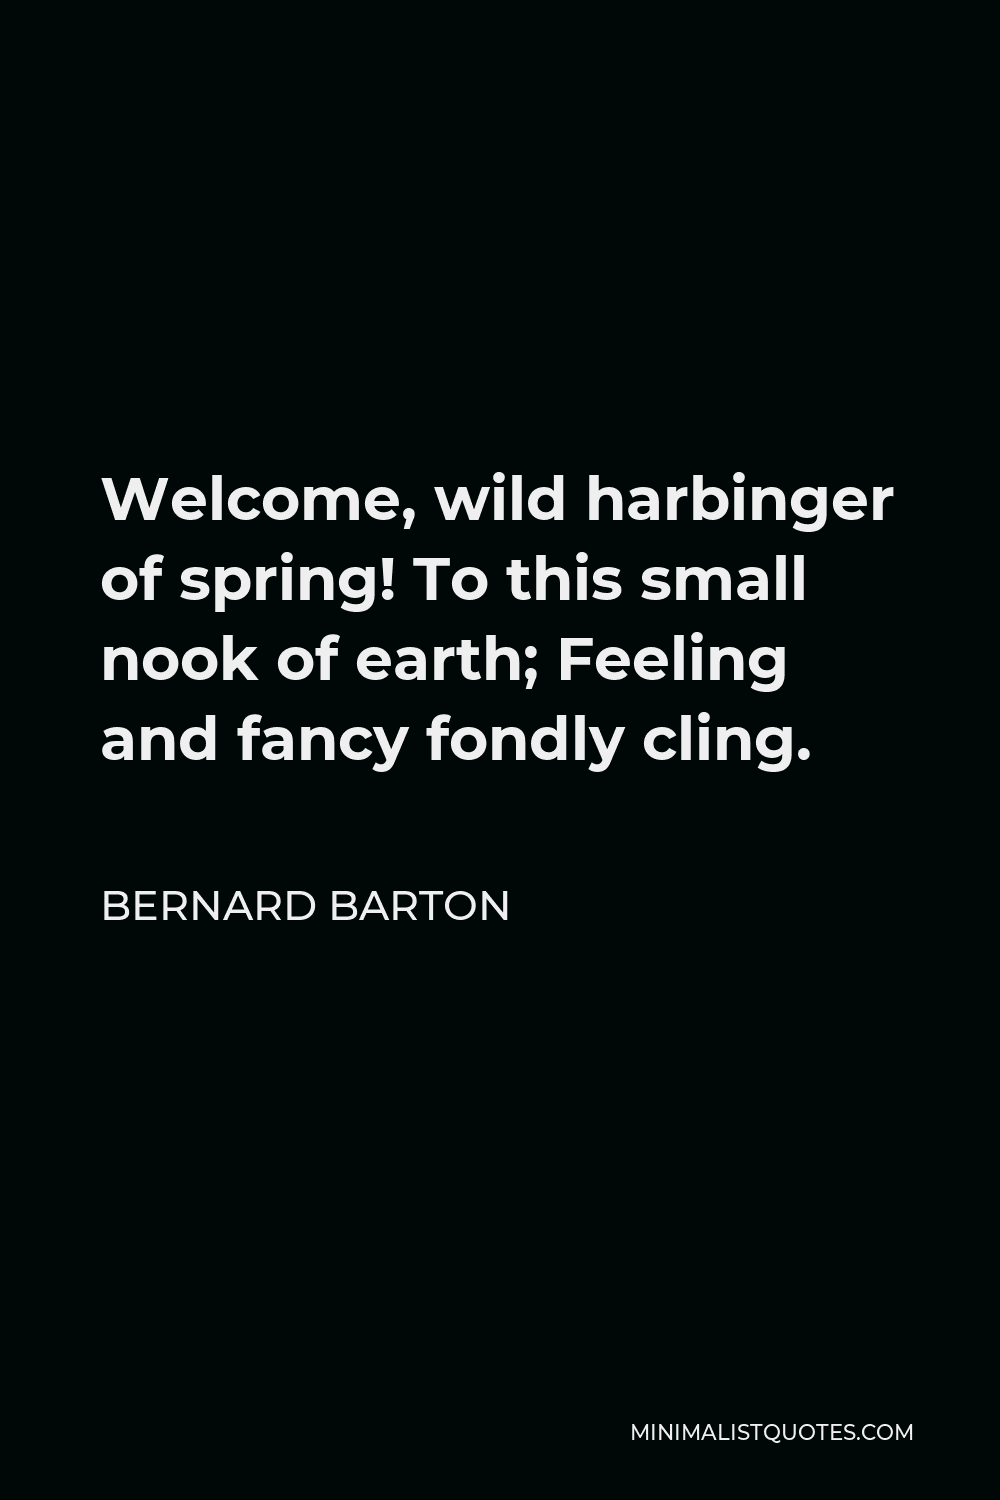 Bernard Barton Quote - Welcome, wild harbinger of spring! To this small nook of earth; Feeling and fancy fondly cling.